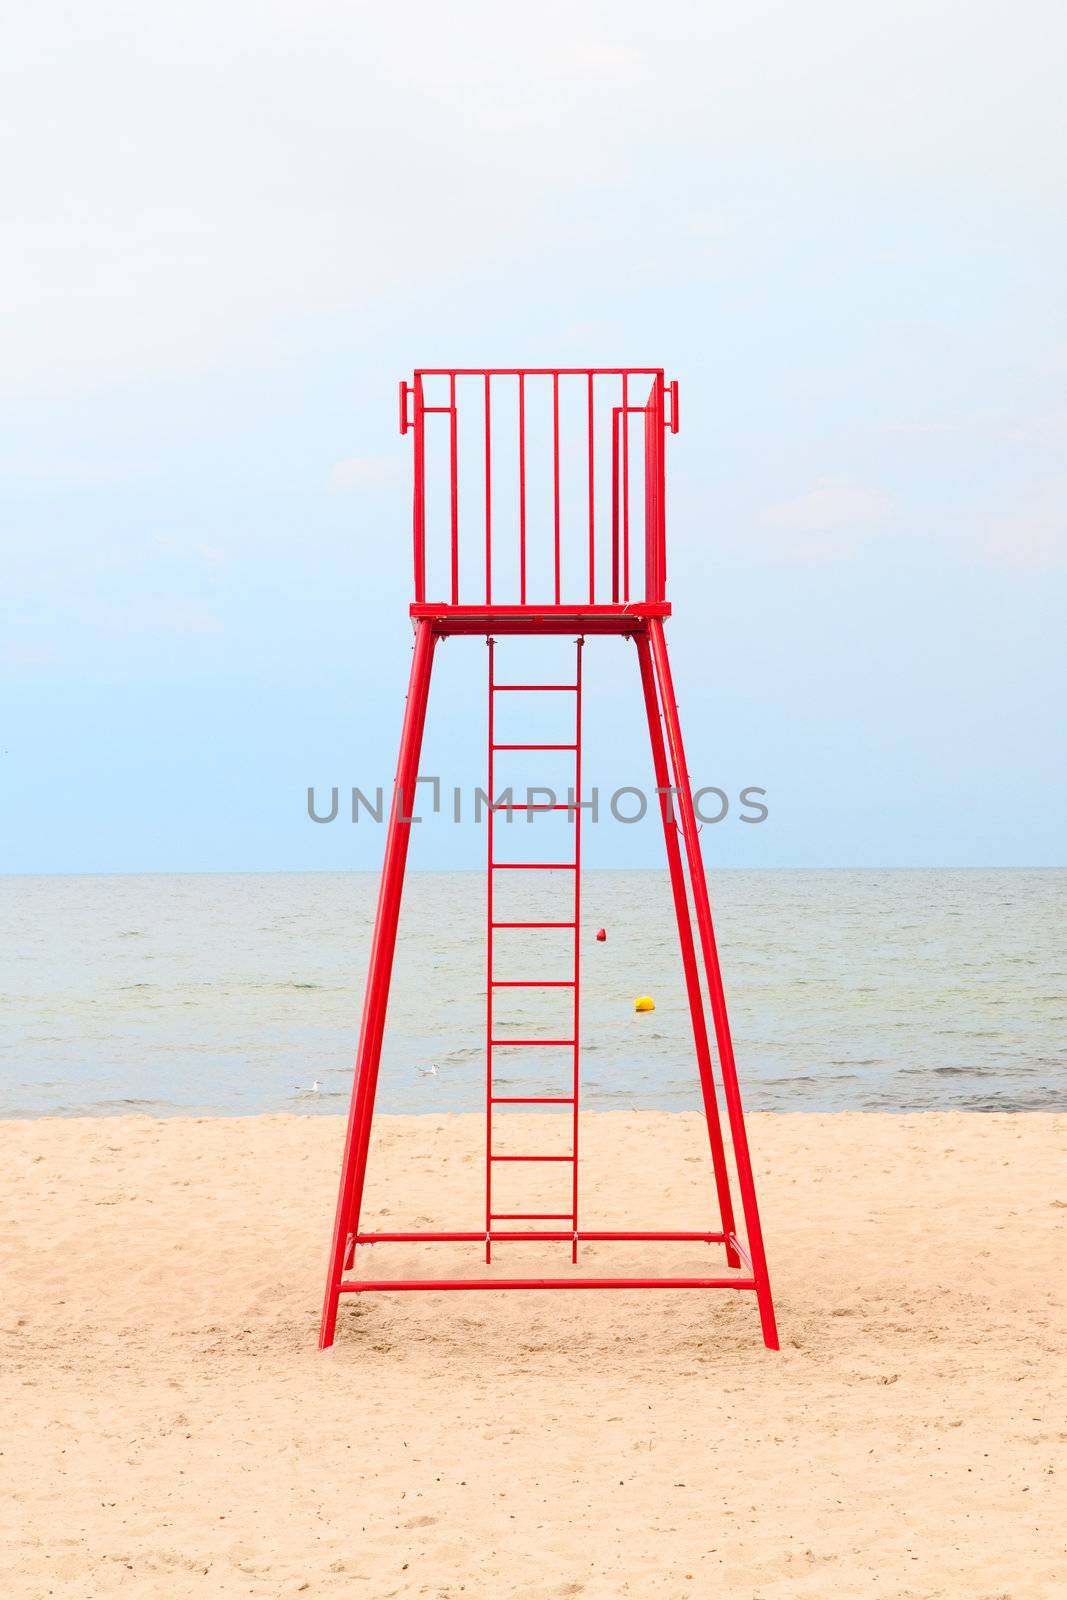 A place of work of a lifeguard